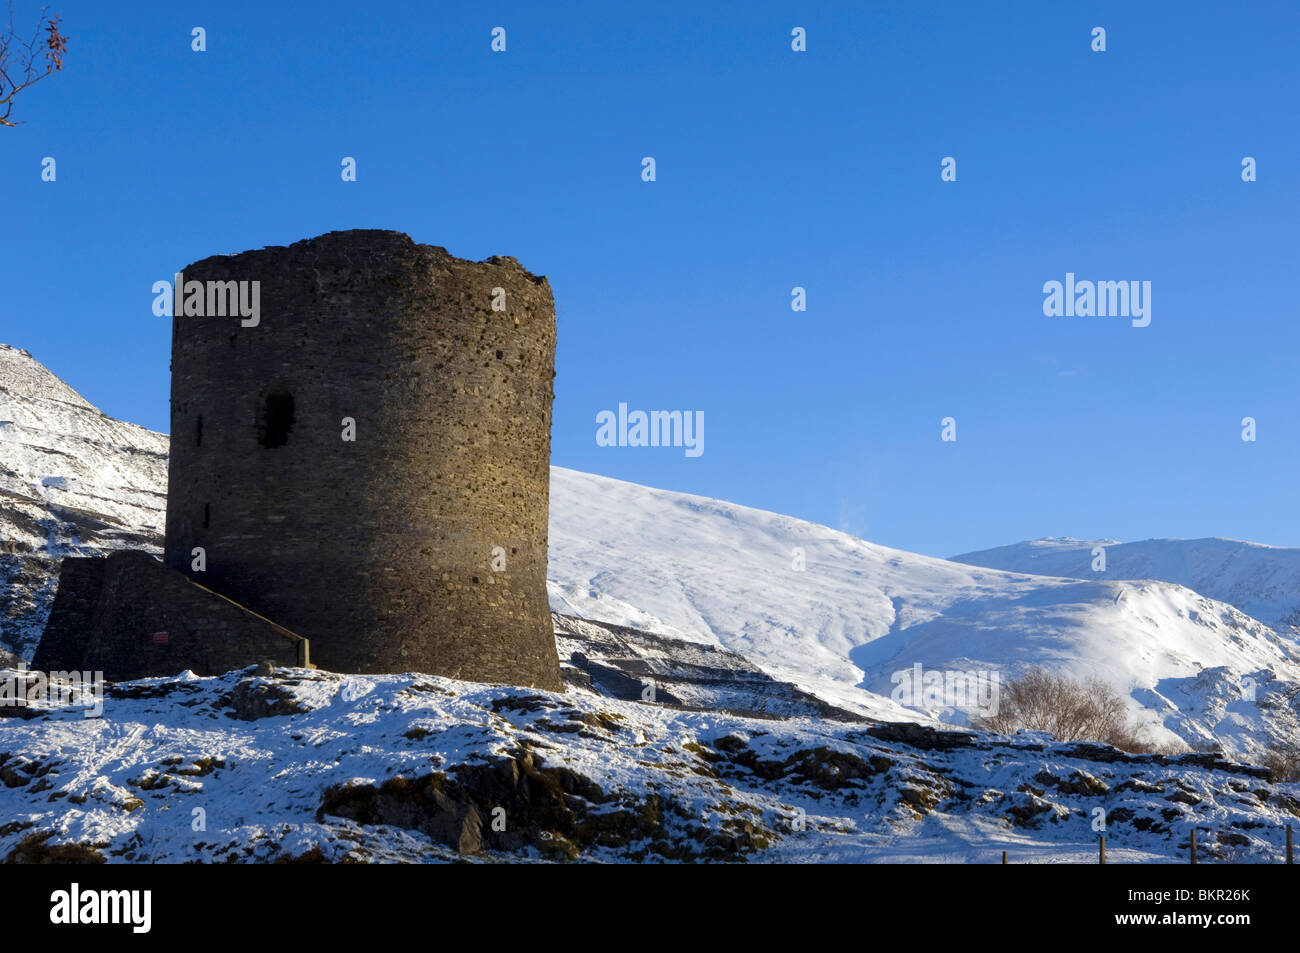 Wales, Gwynedd, Snowdonia. Dolbadarn Castle one of the great castles built by the Welsh princes in the 13th Century. Stock Photo